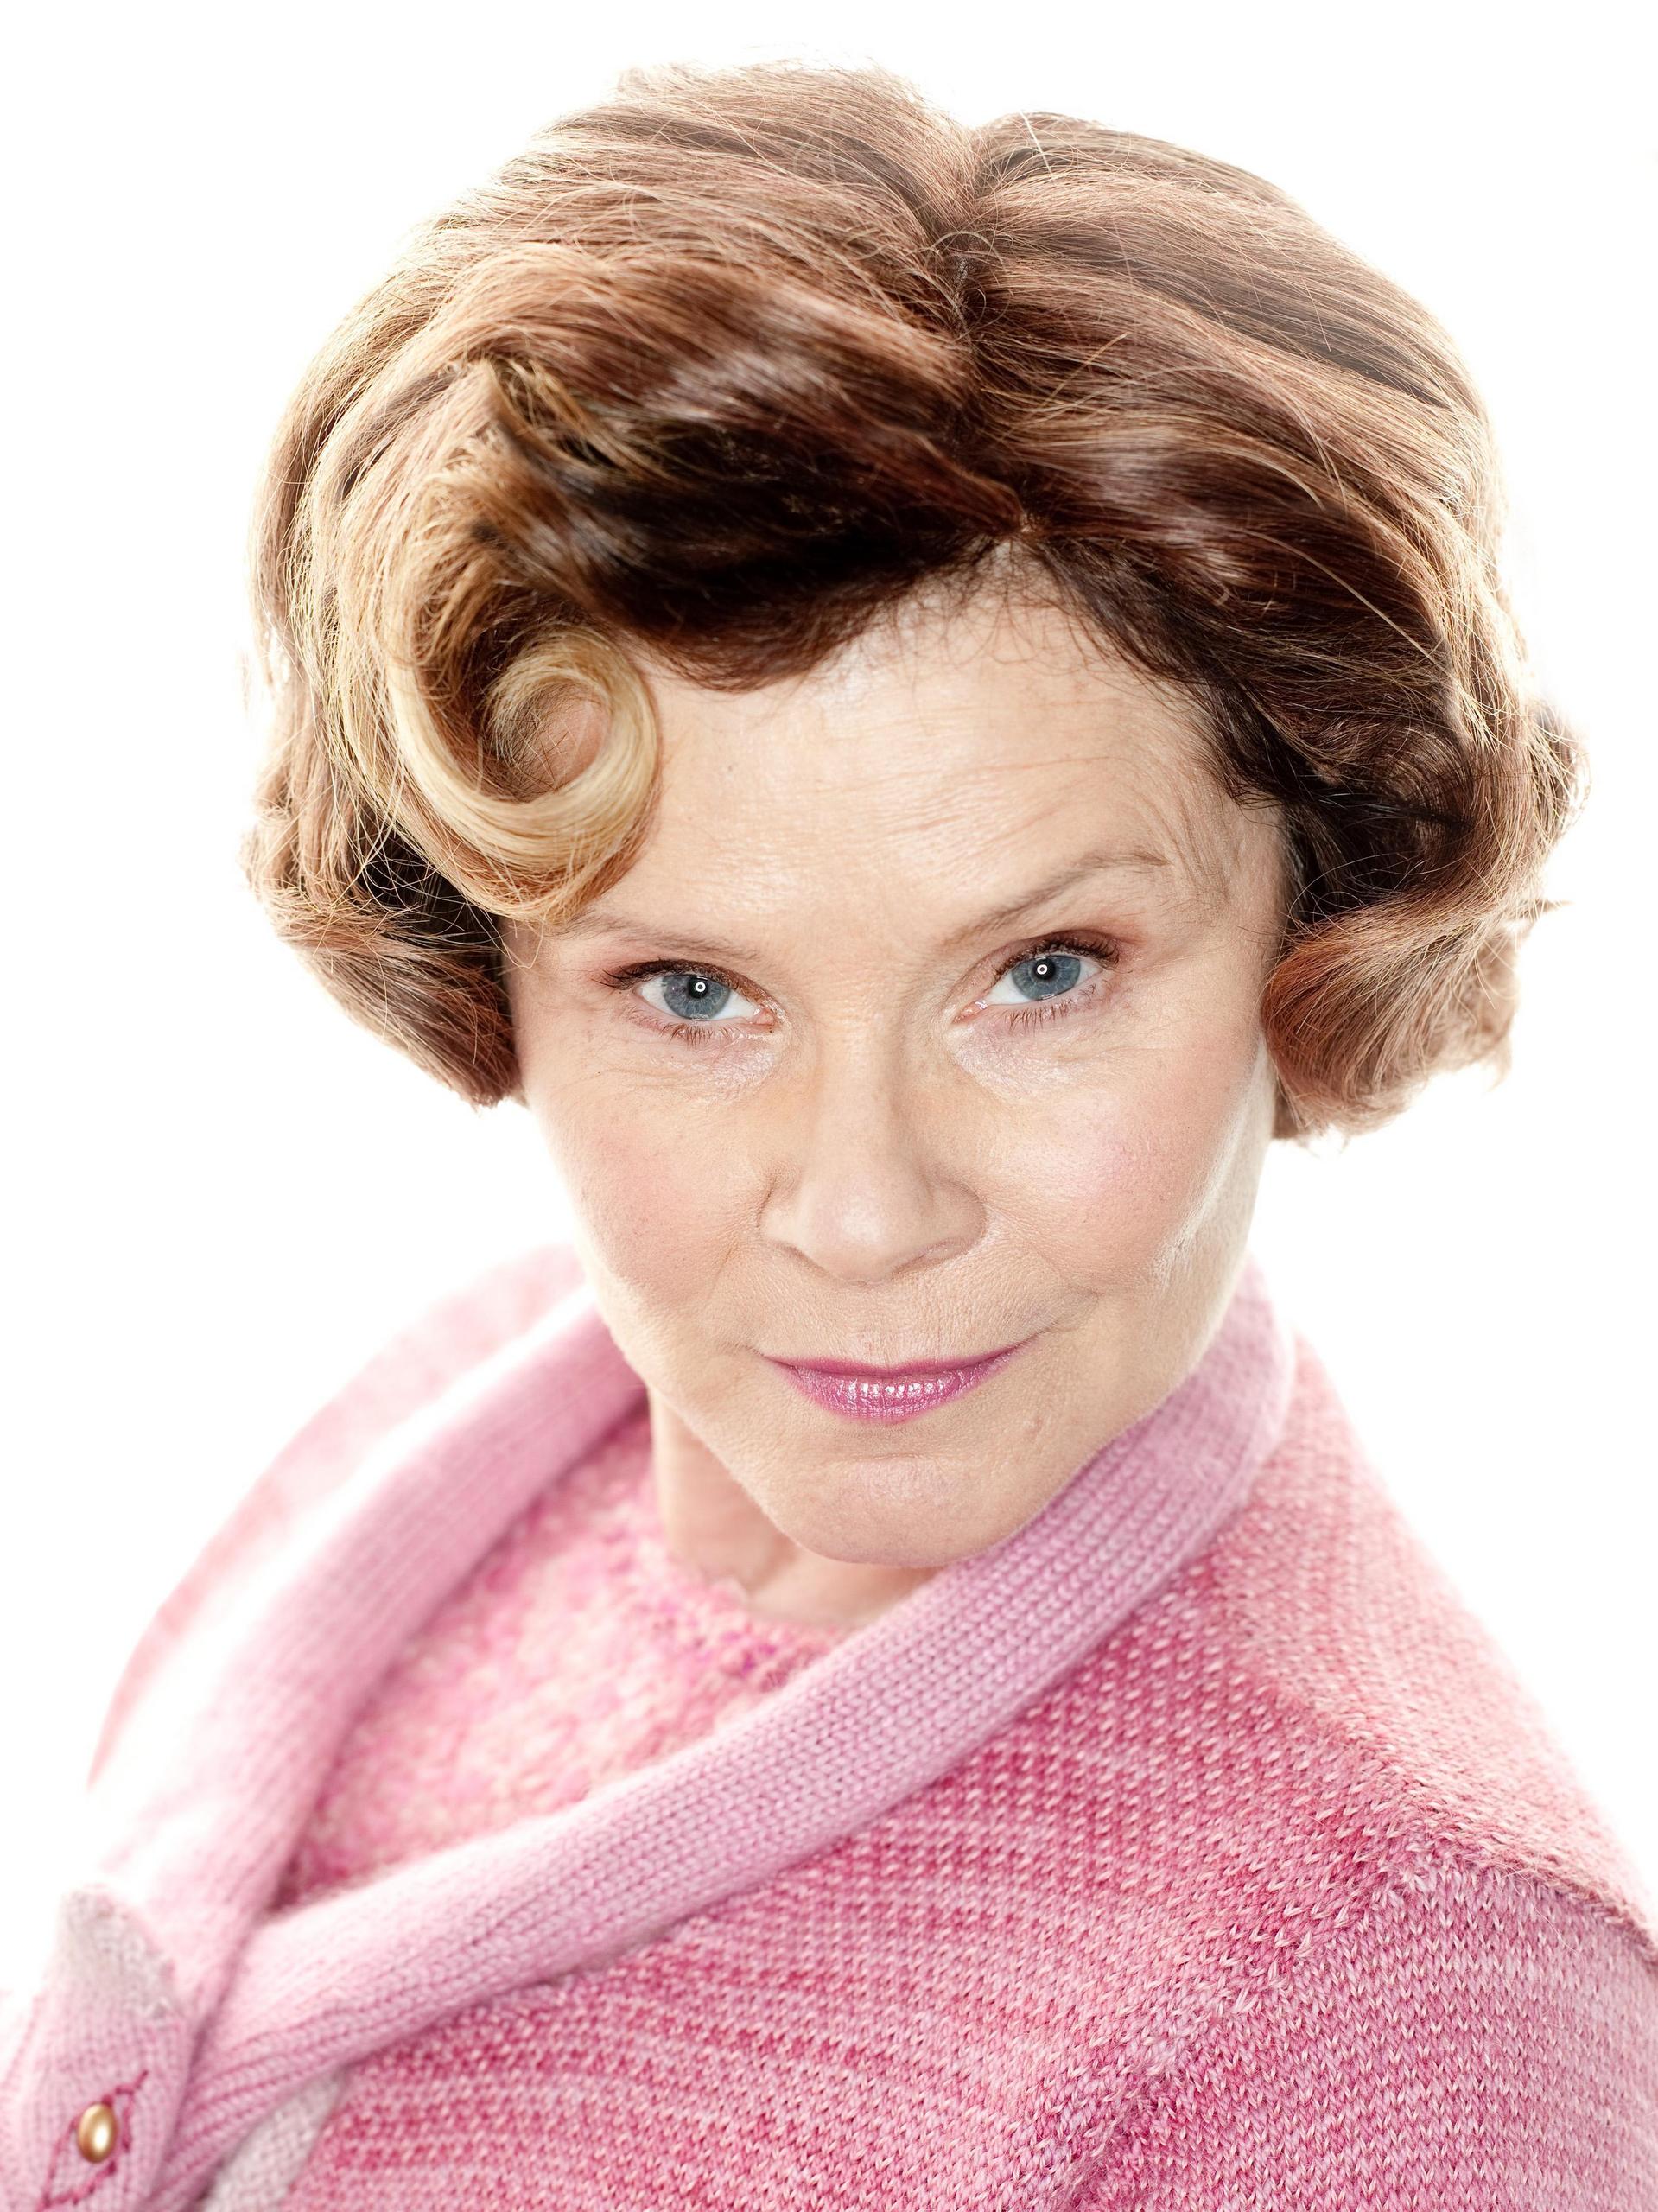 Umbridge - Harry Potter and the Deathly Hallows Movies Photo (17179848) - Fanpop1919 x 2560